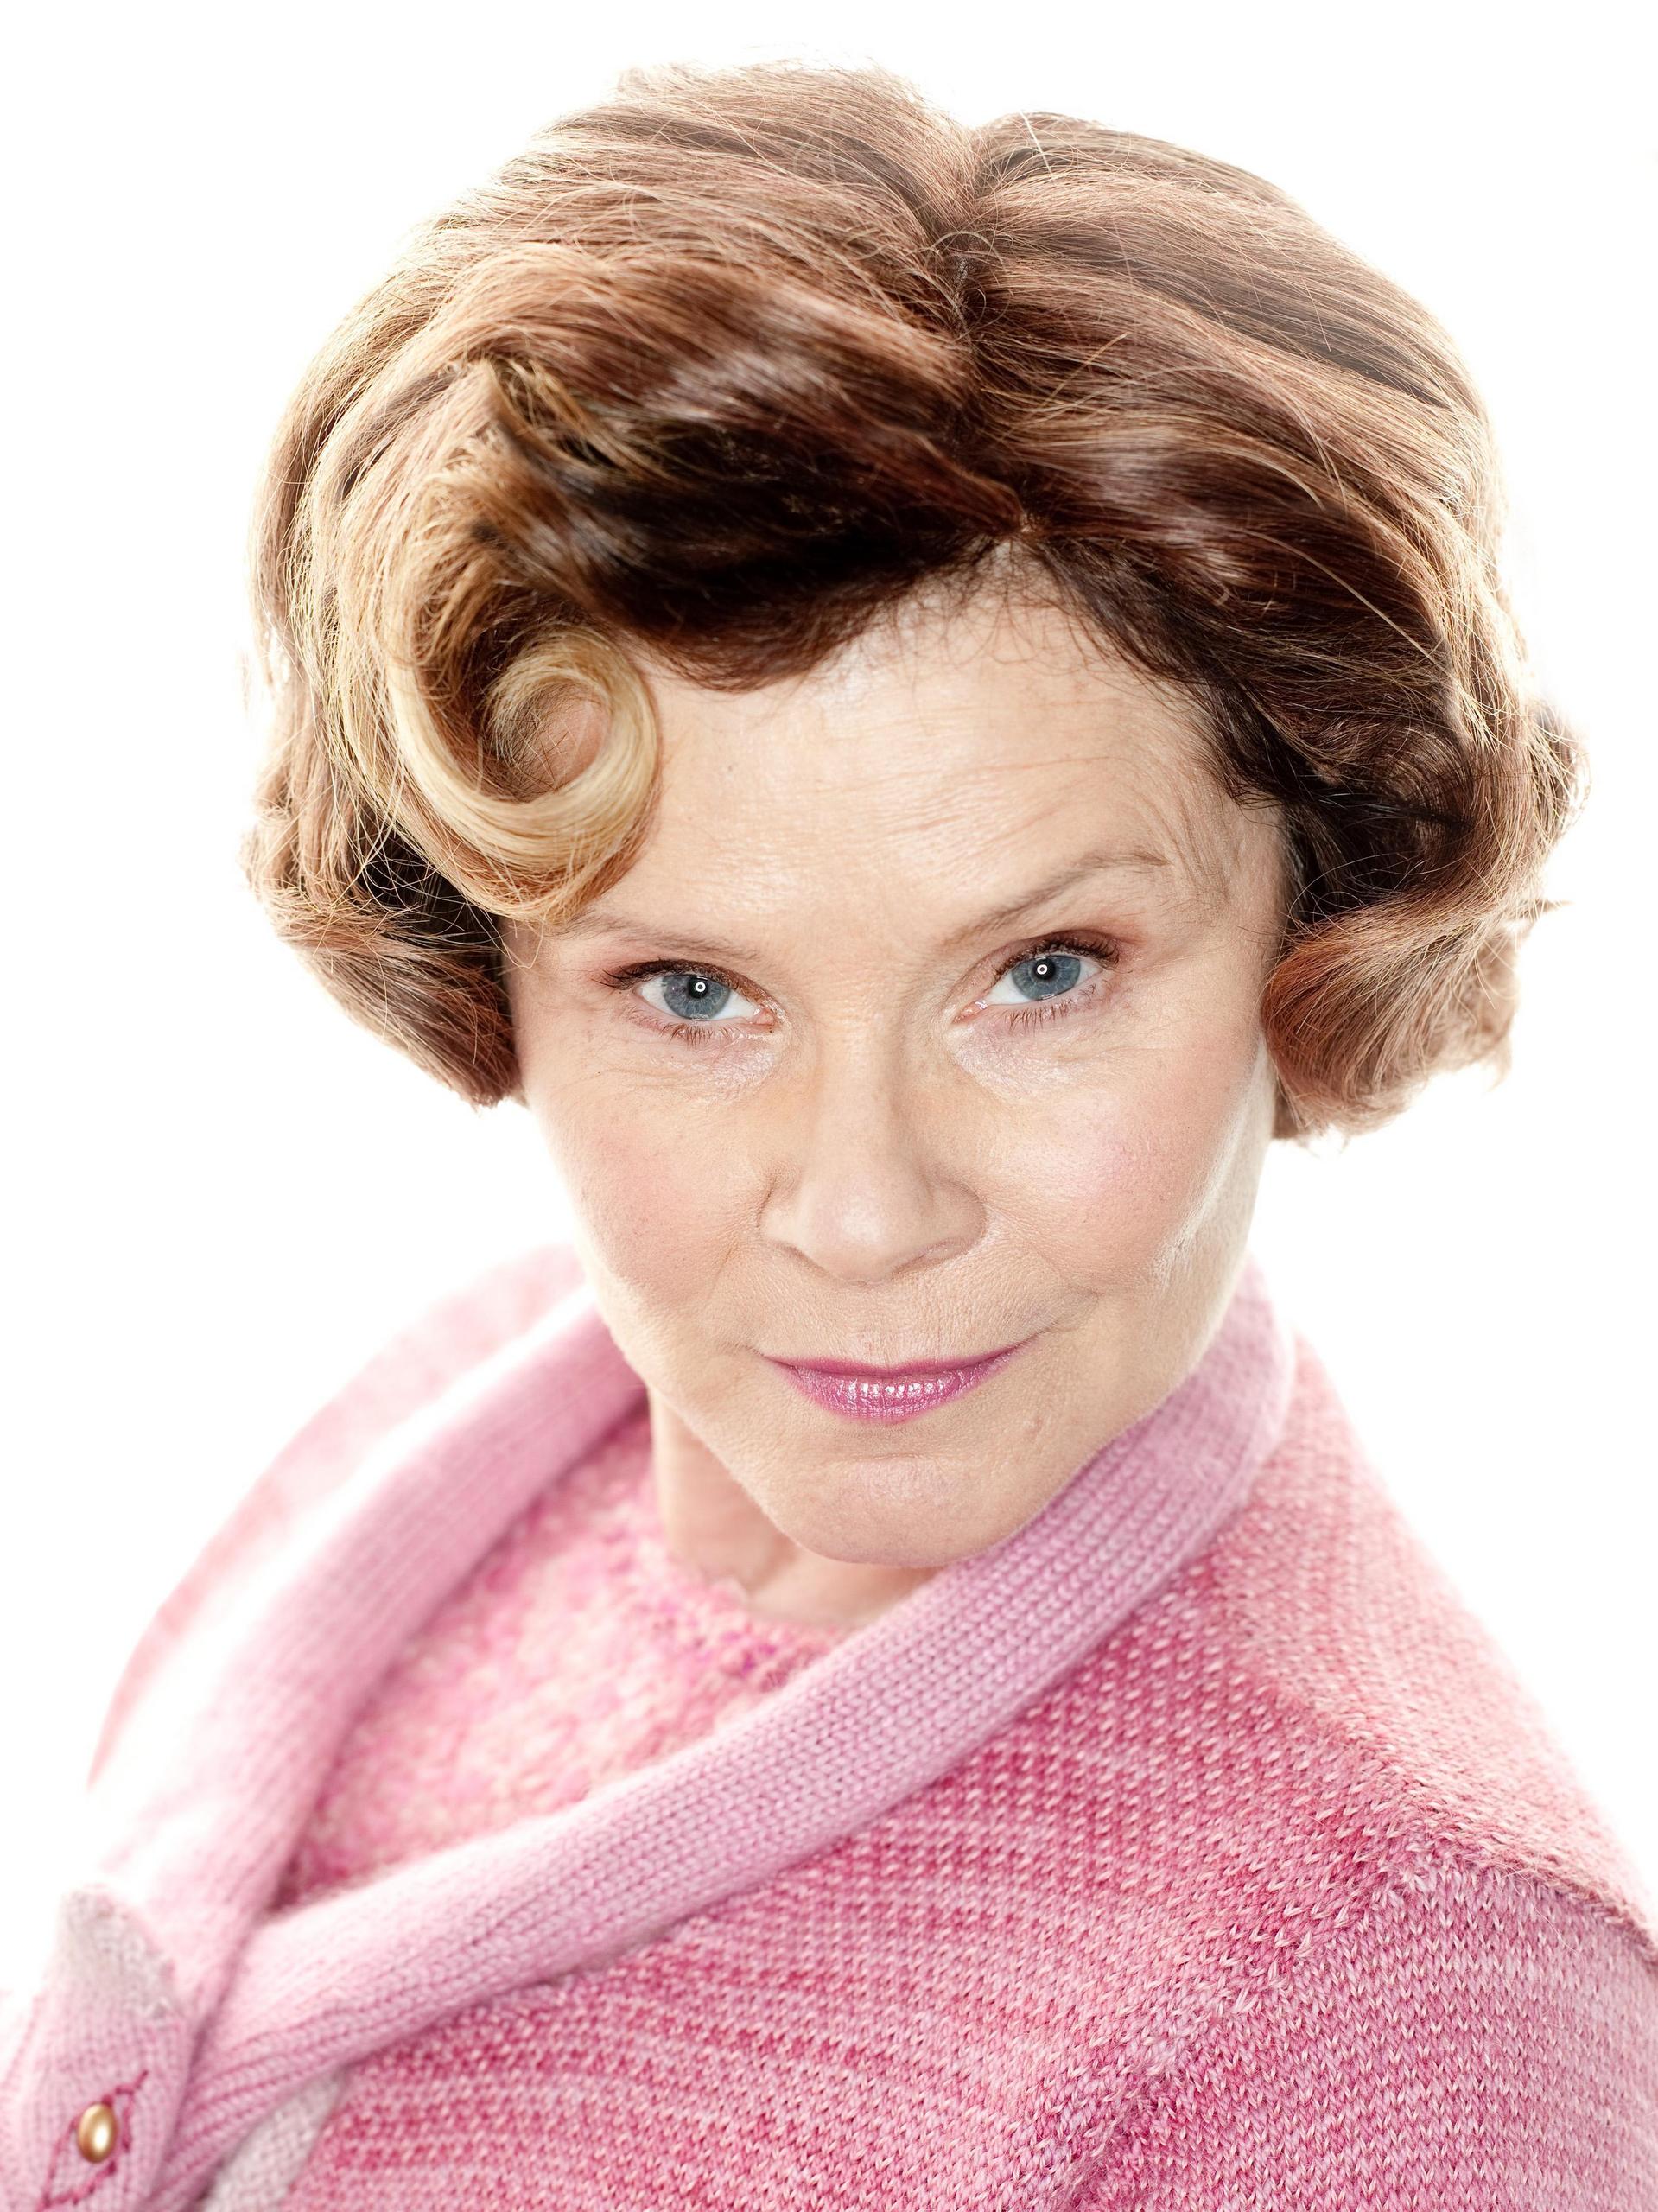 Umbridge - Harry Potter and the Deathly Hallows Movies Photo (17179848) - Fanpop1919 x 2560